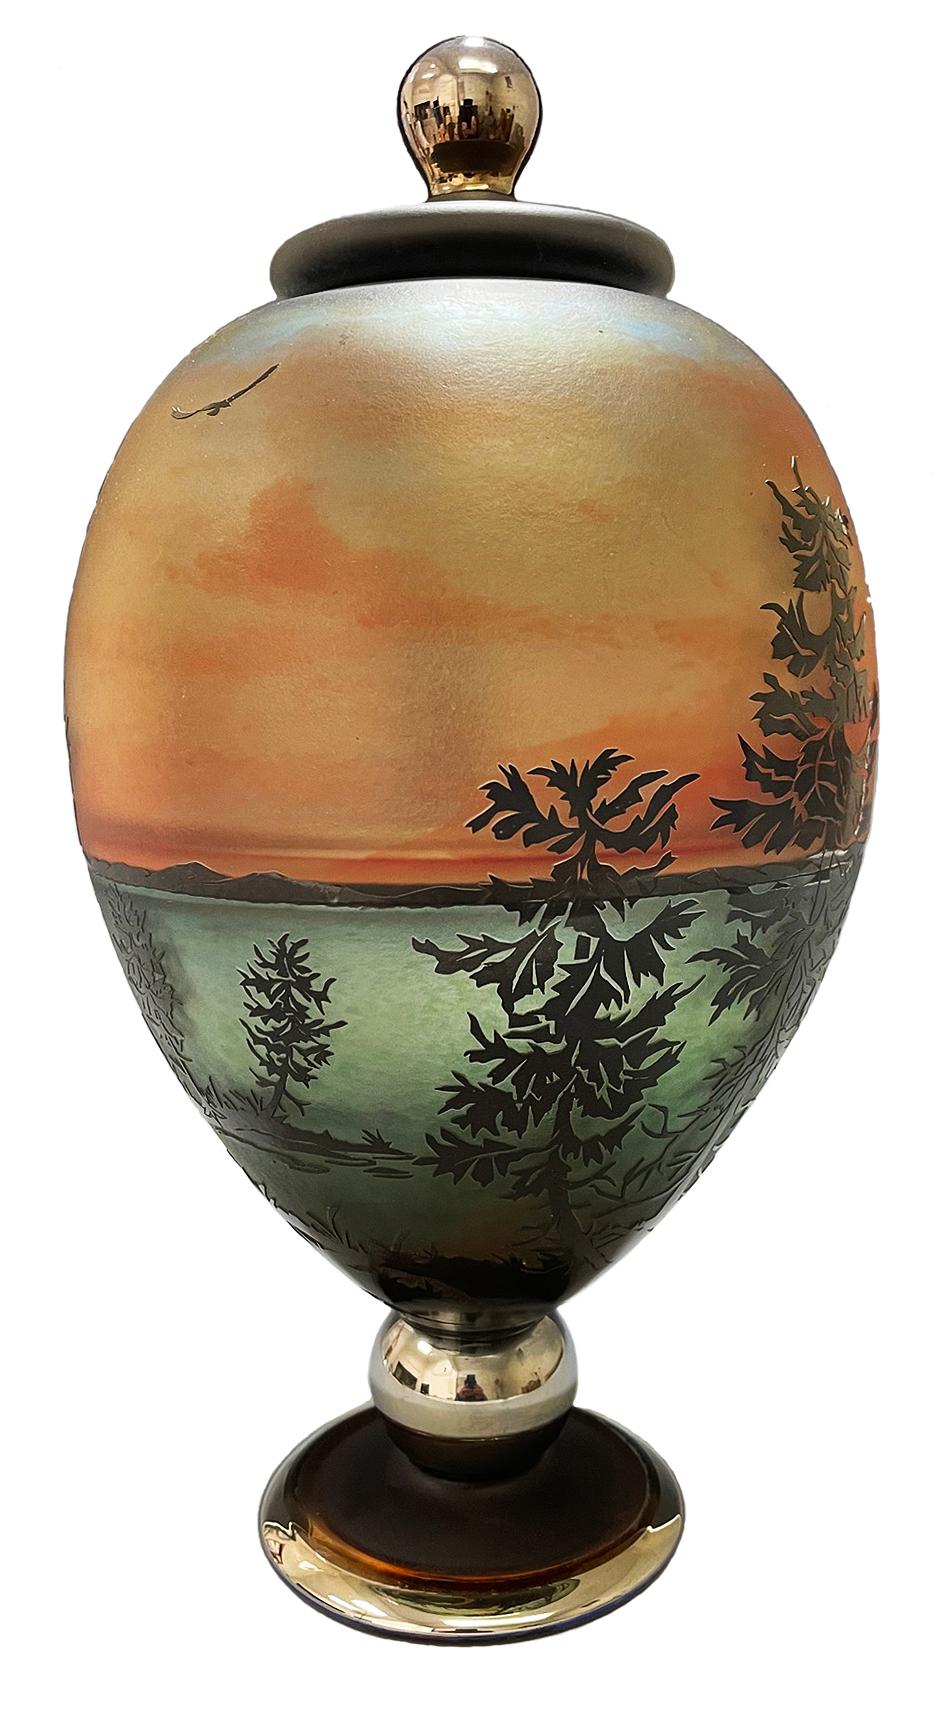 This cameo etched lidded jar by Gary Genetti is incalmo and overlay blown glass. The original artwork is drawn, hand cut then pressure etched through layers of color to create the imagery. The piece consists of sections of layered colored glass